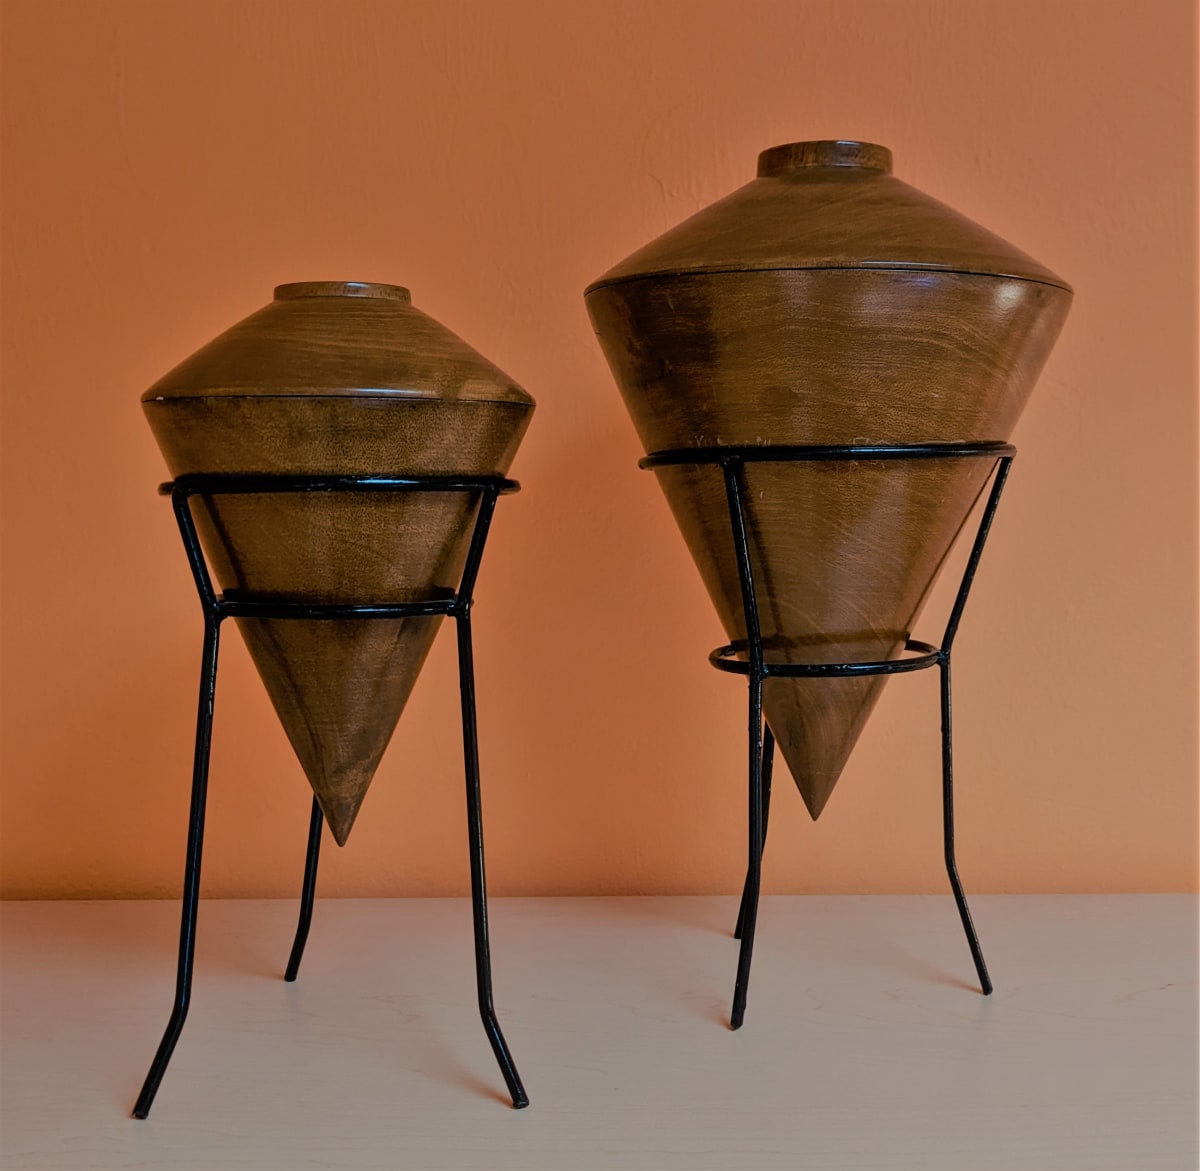 Pair of Turned Wood Vessels by Artist Unknown  Image: Pair of Turned Wood Vessels, 17 x 10 x 10 inches and 14 x 7 x 7 inches